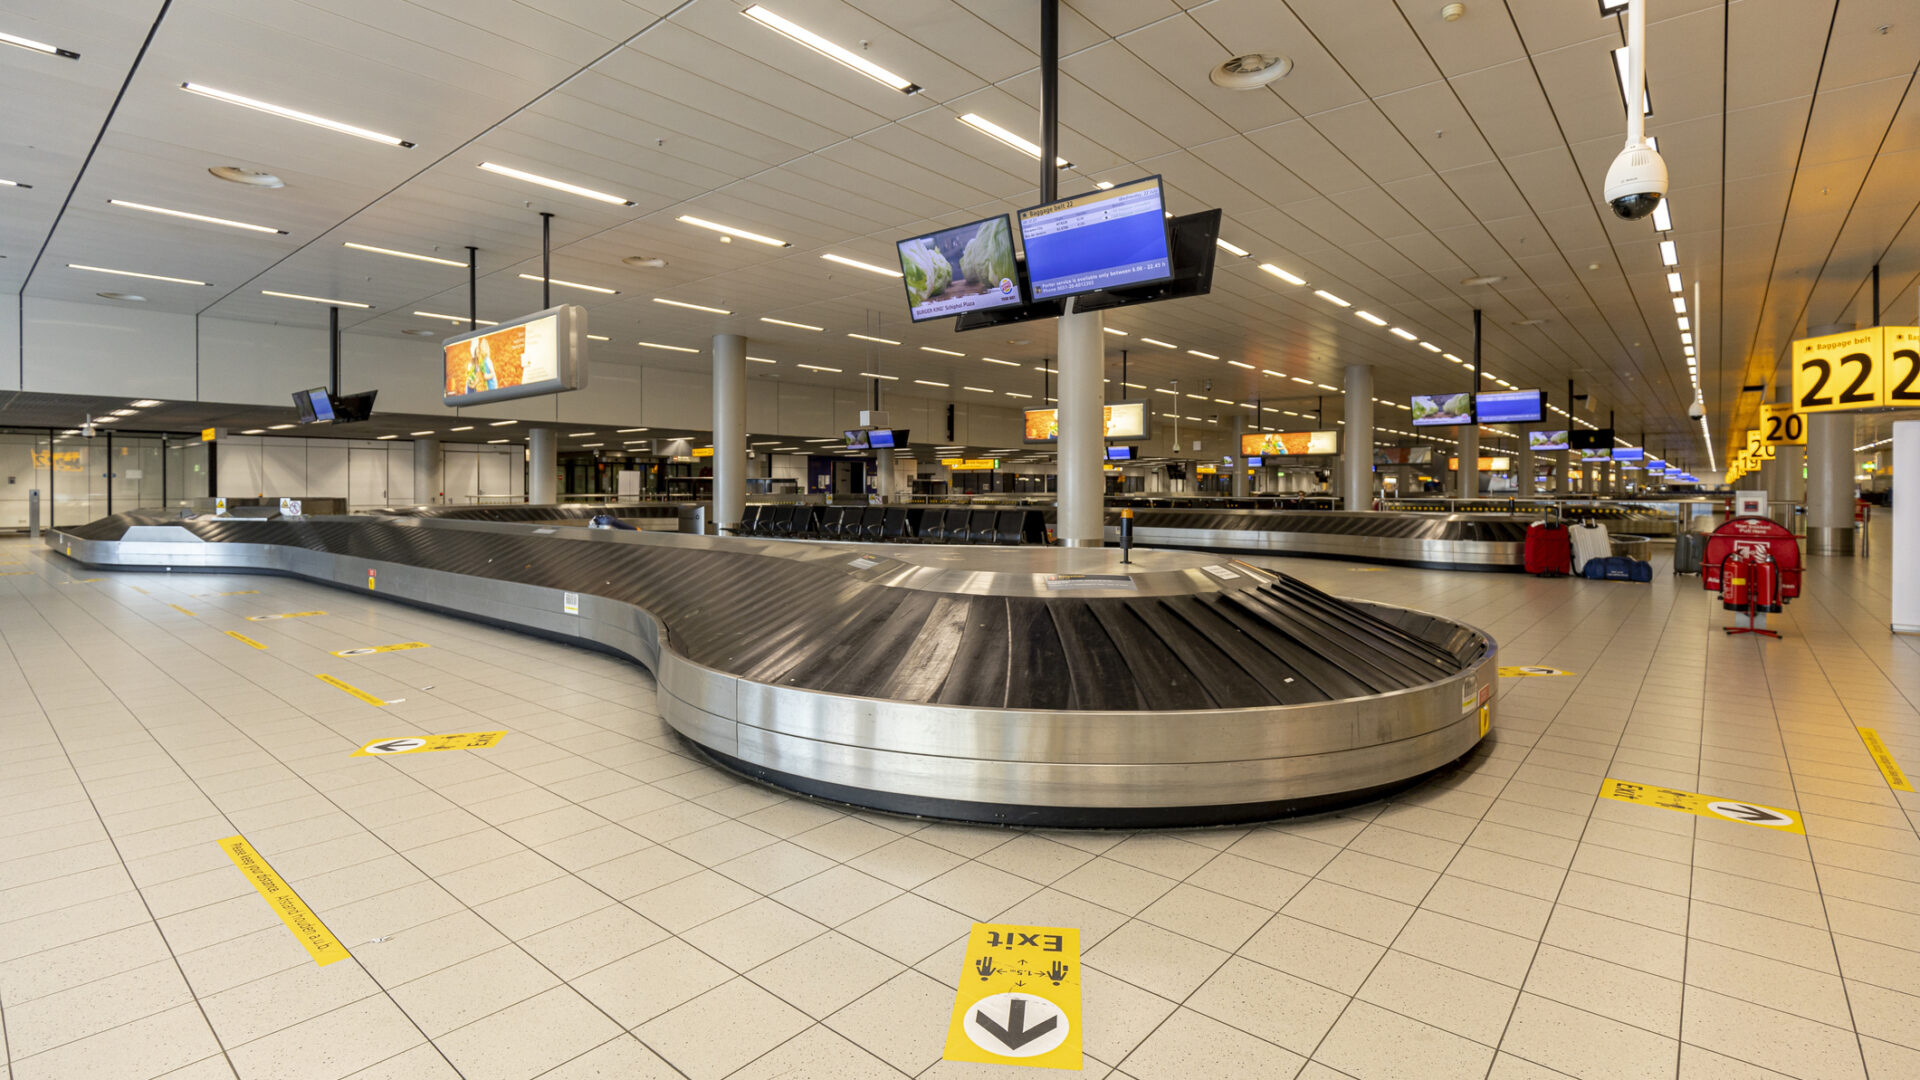 Amsterdam, Netherlands – July 22, 2020: Hallway with baggage claim conveyor belts in airport almost deserted during the COVID-19 coronavirus outbreak